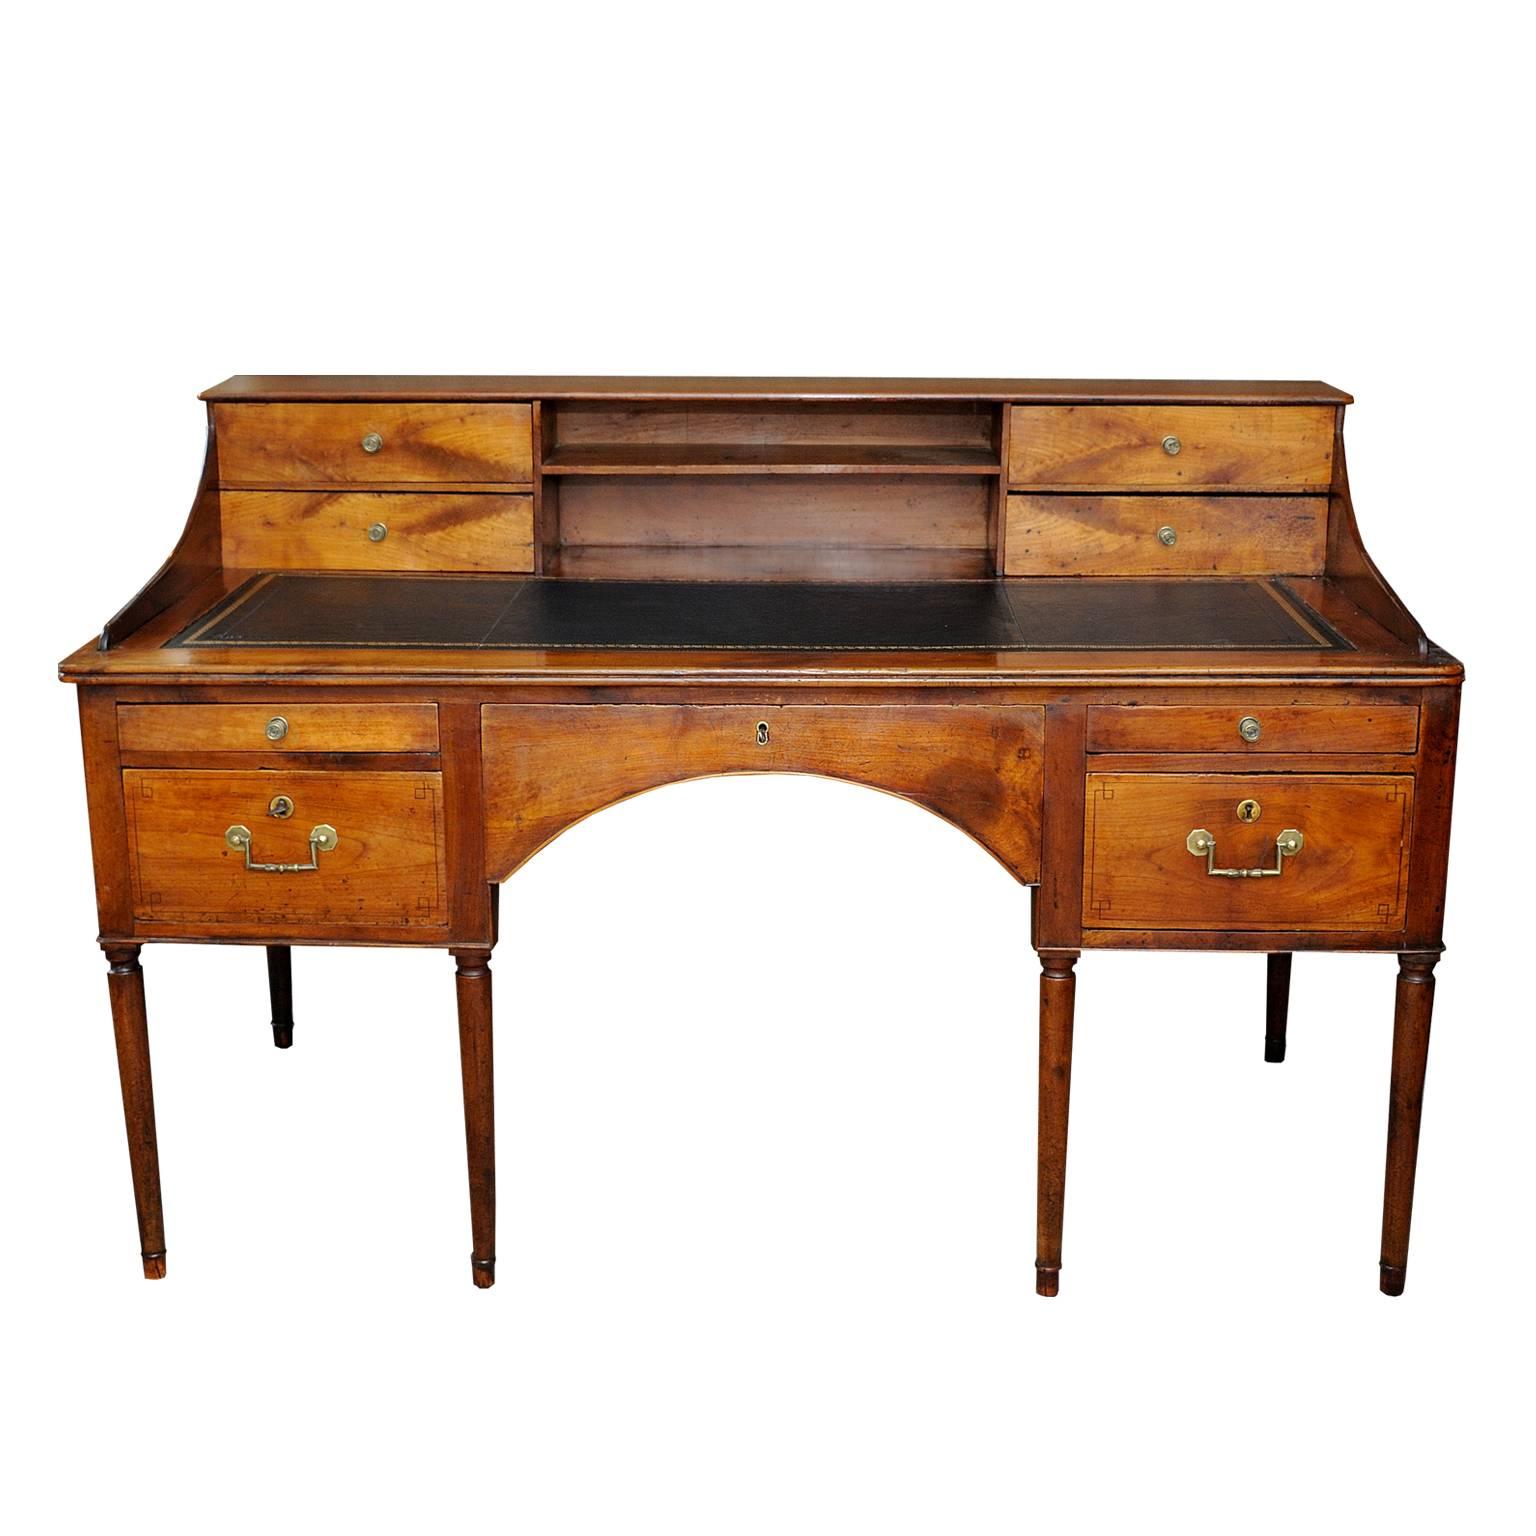 This is large and really quite beautiful French late 18th century Louis XVI period solid cherrywood writing table/desk featuring drawers/locks and pigeon holes and a black gilt tooled leather top and slide (purchased by us from the estate office of